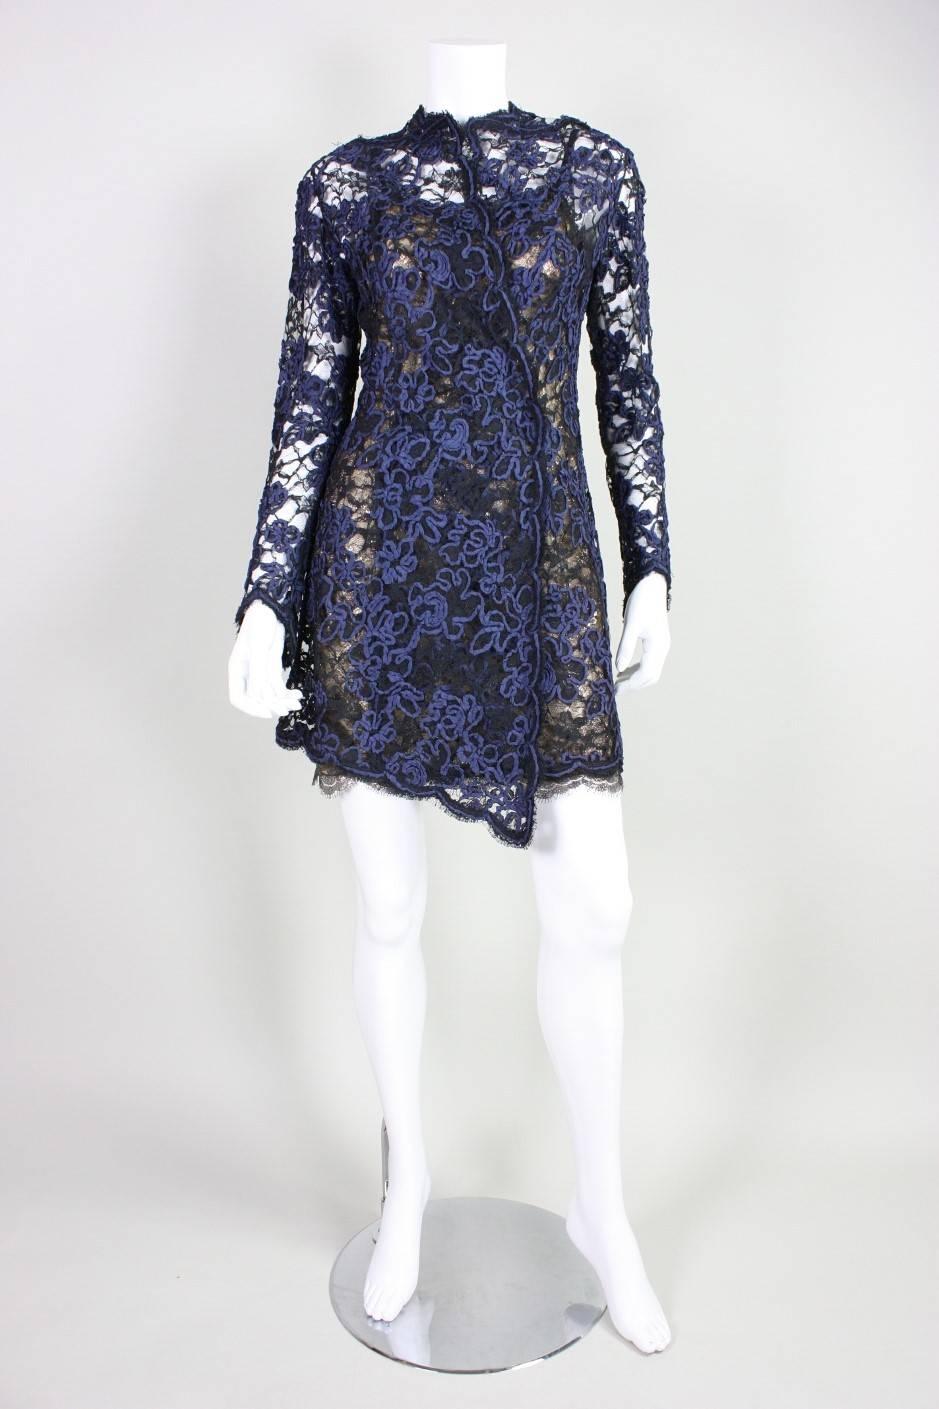 Vintage ensemble from Geoffrey Beene dates to the 1990's and consists of a lace dress and coat.  Metallic gold lace mini dress has spaghetti straps, scalloped hem, and a center back zipper. Black lace overcoat has navy ribbon over-embroidery in a